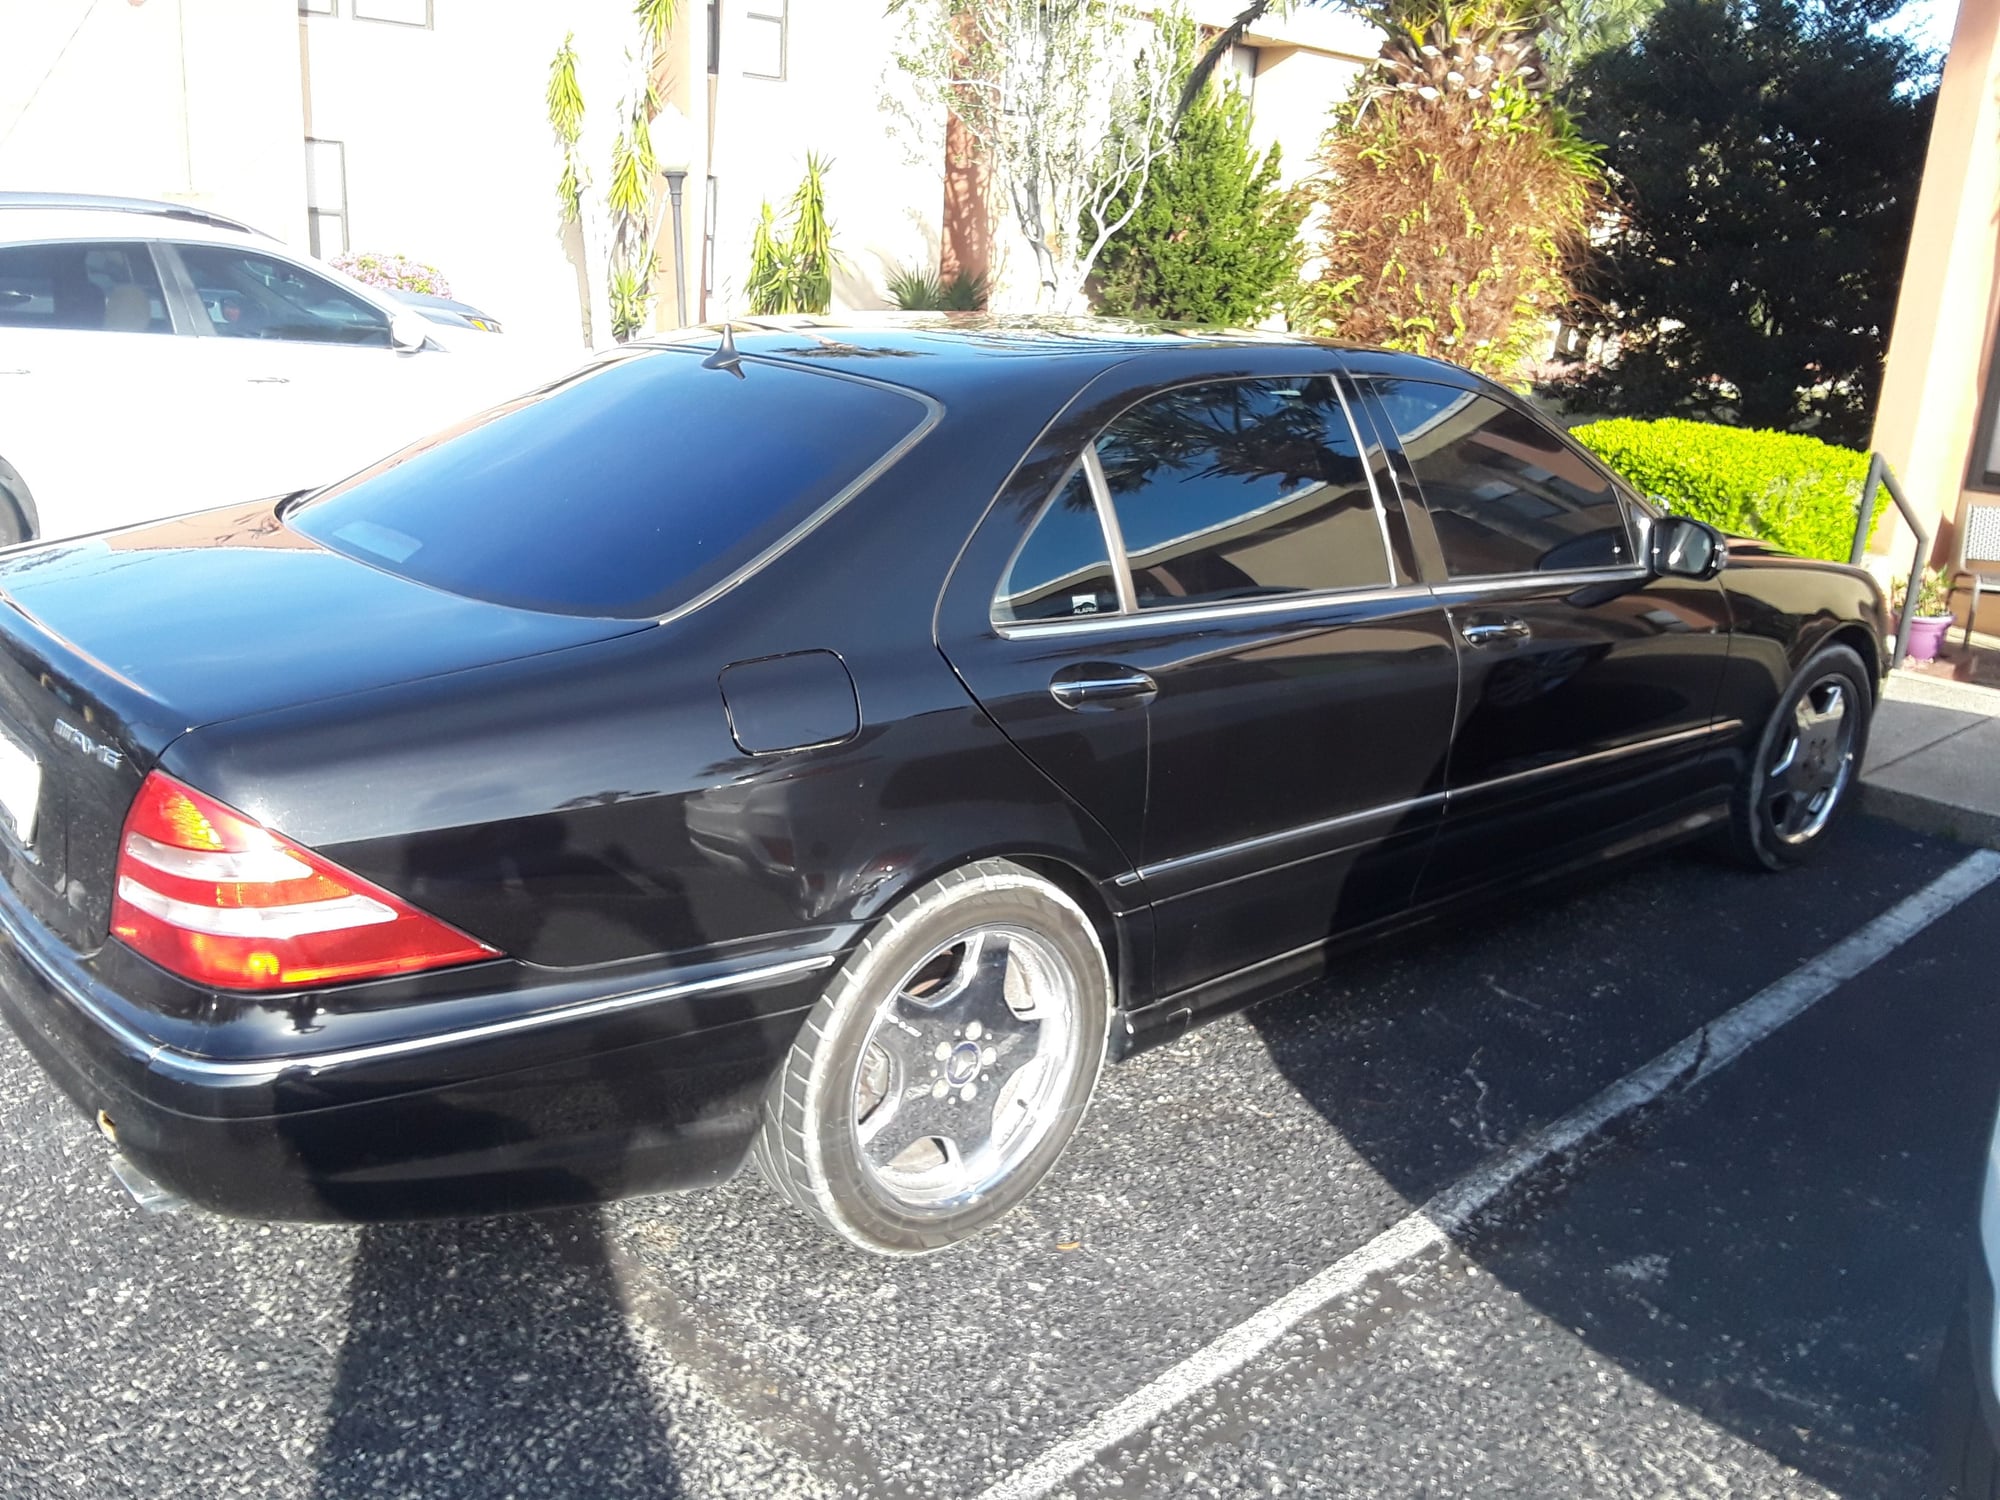 2001 Mercedes-Benz S55 AMG - 2001 S55 AMG Mercedes-Benz 93K Miles - $5,500 - Used - VIN WDBNG73J91A202022 - 93,600 Miles - 8 cyl - 2WD - Automatic - Sedan - Black - Gulf Breeze, FL 32561, United States